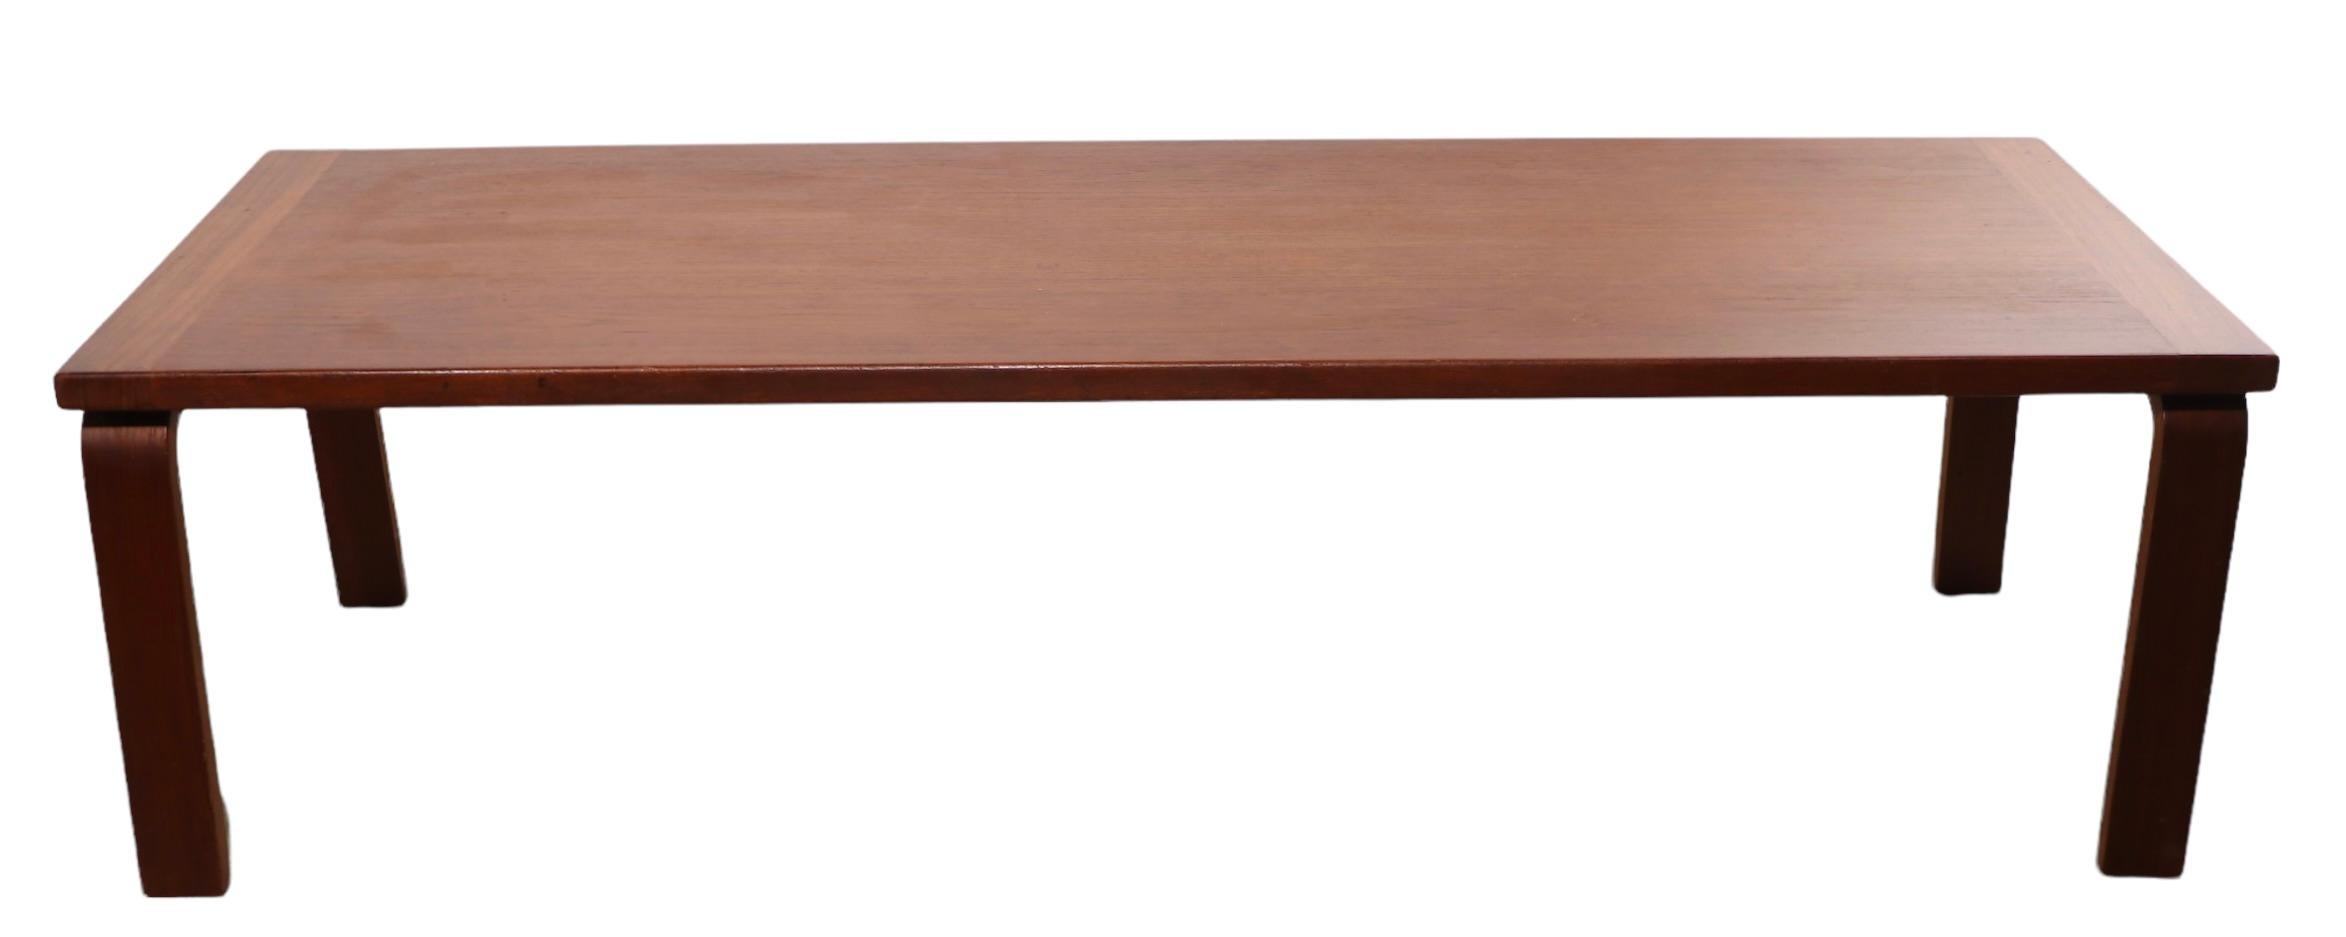 20th Century Mid Century Teak Coffee Table by Westnofa Made in Norway, C 1960/1970s For Sale